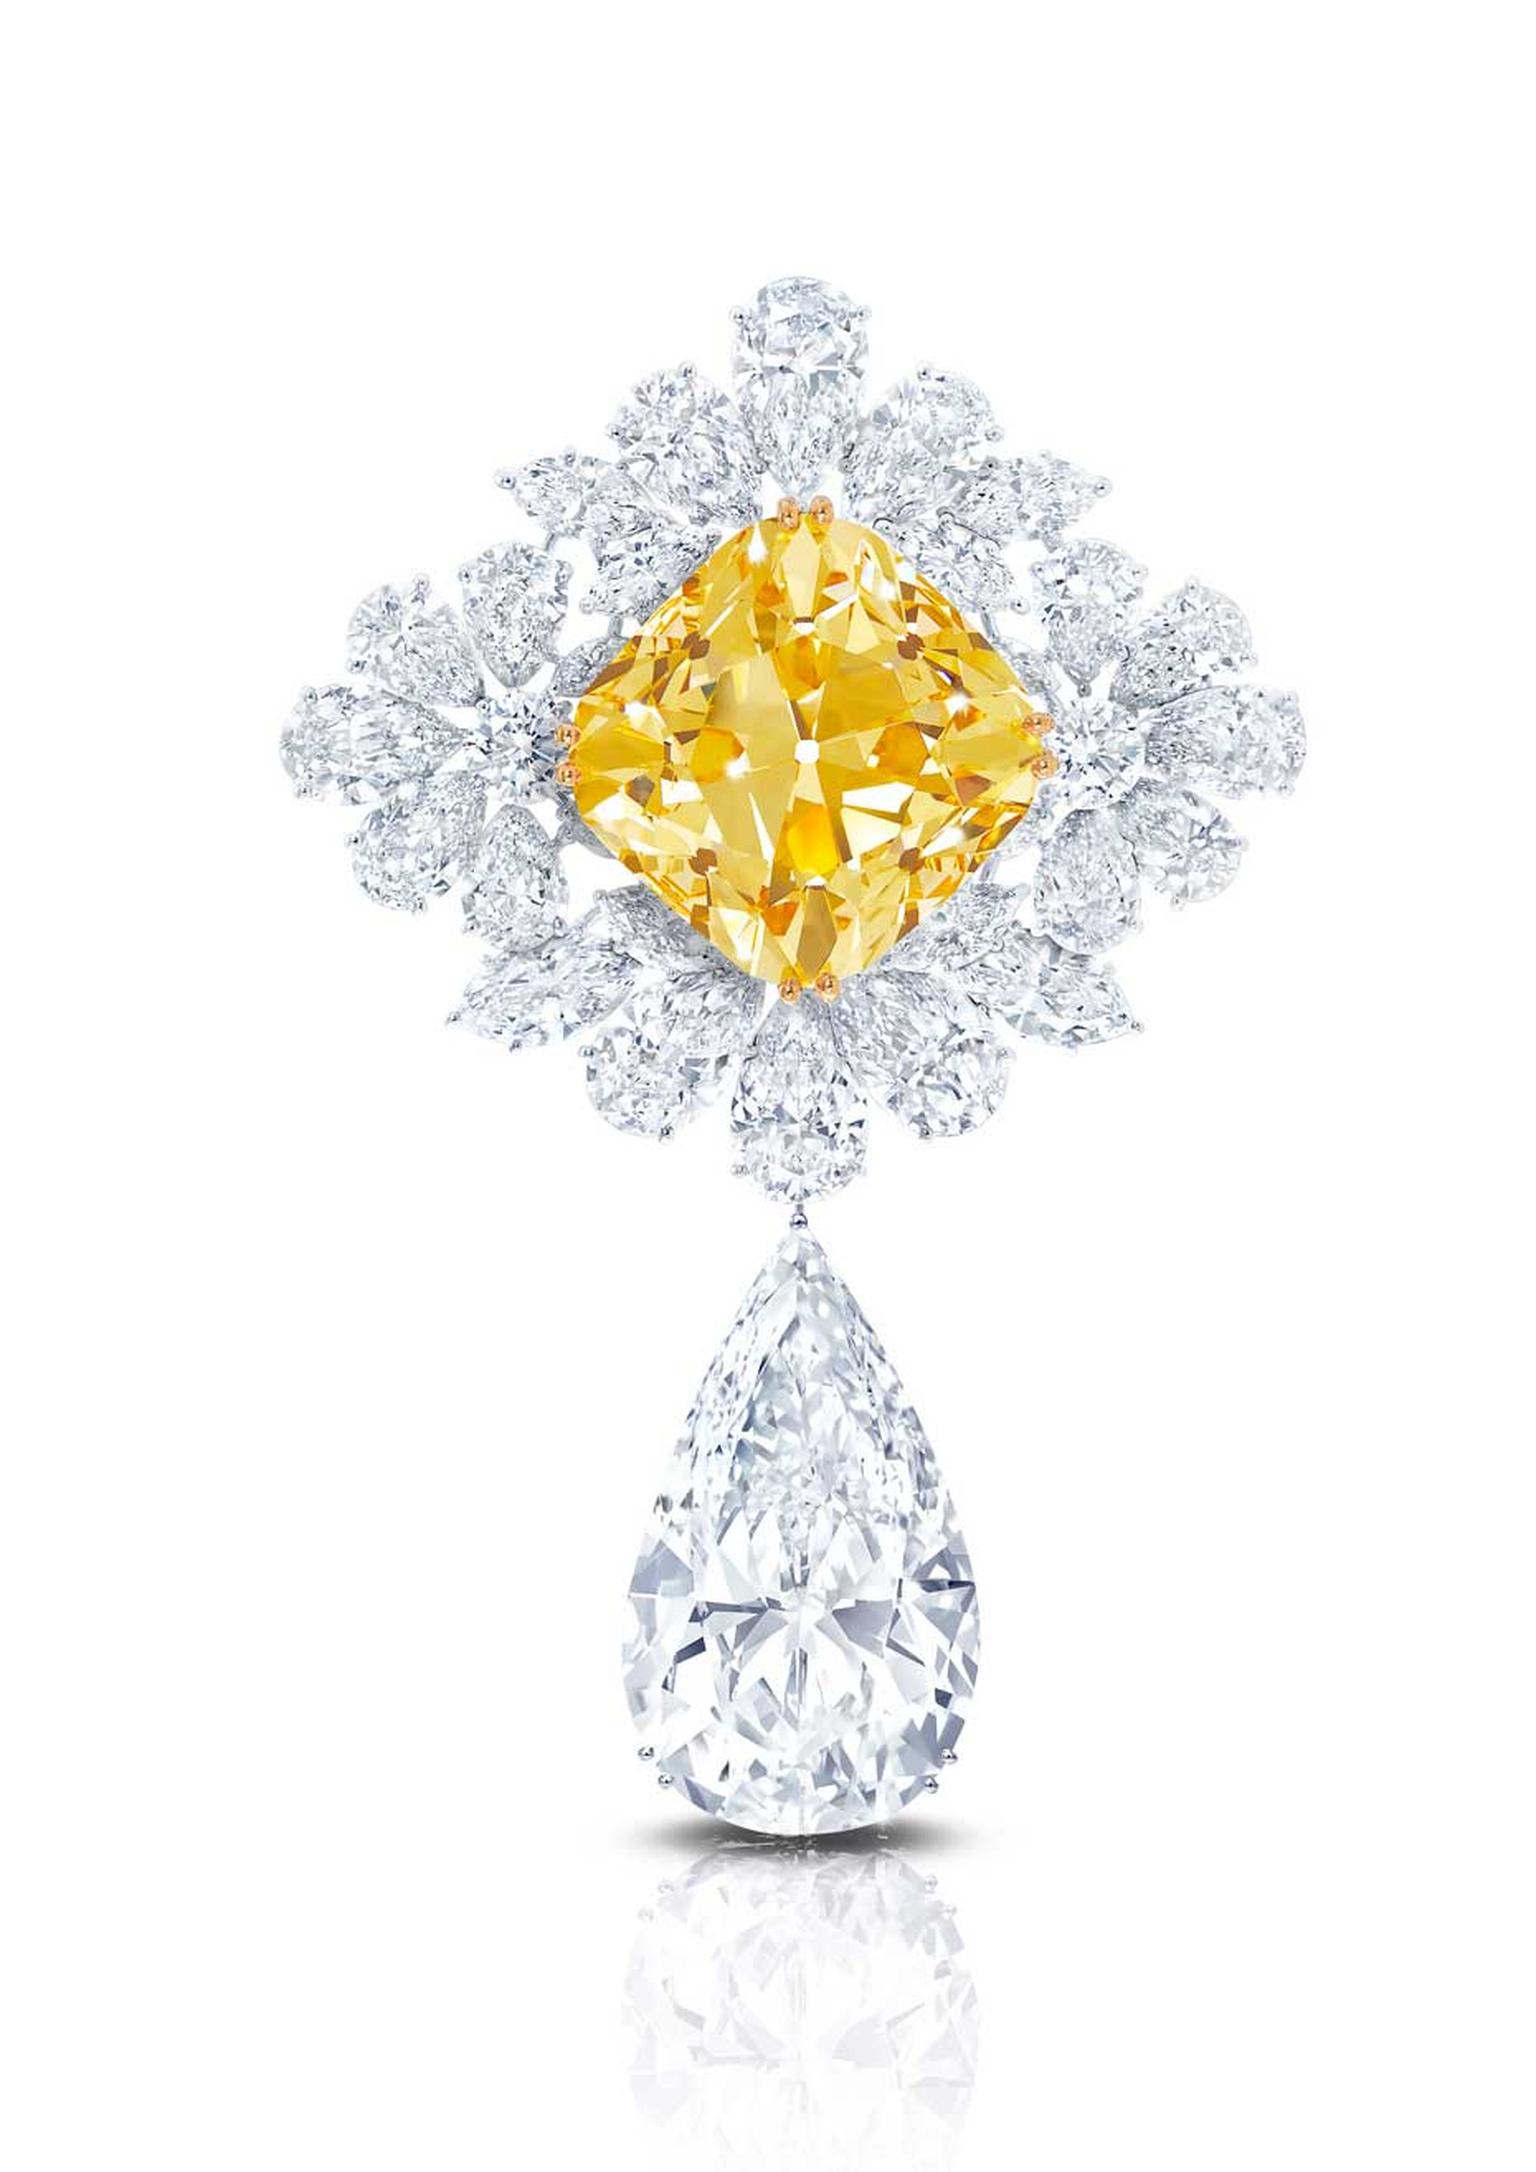 The Graff Royal Star of Paris - set with over 200ct of diamonds - is believed to be the most valuable brooch ever created.